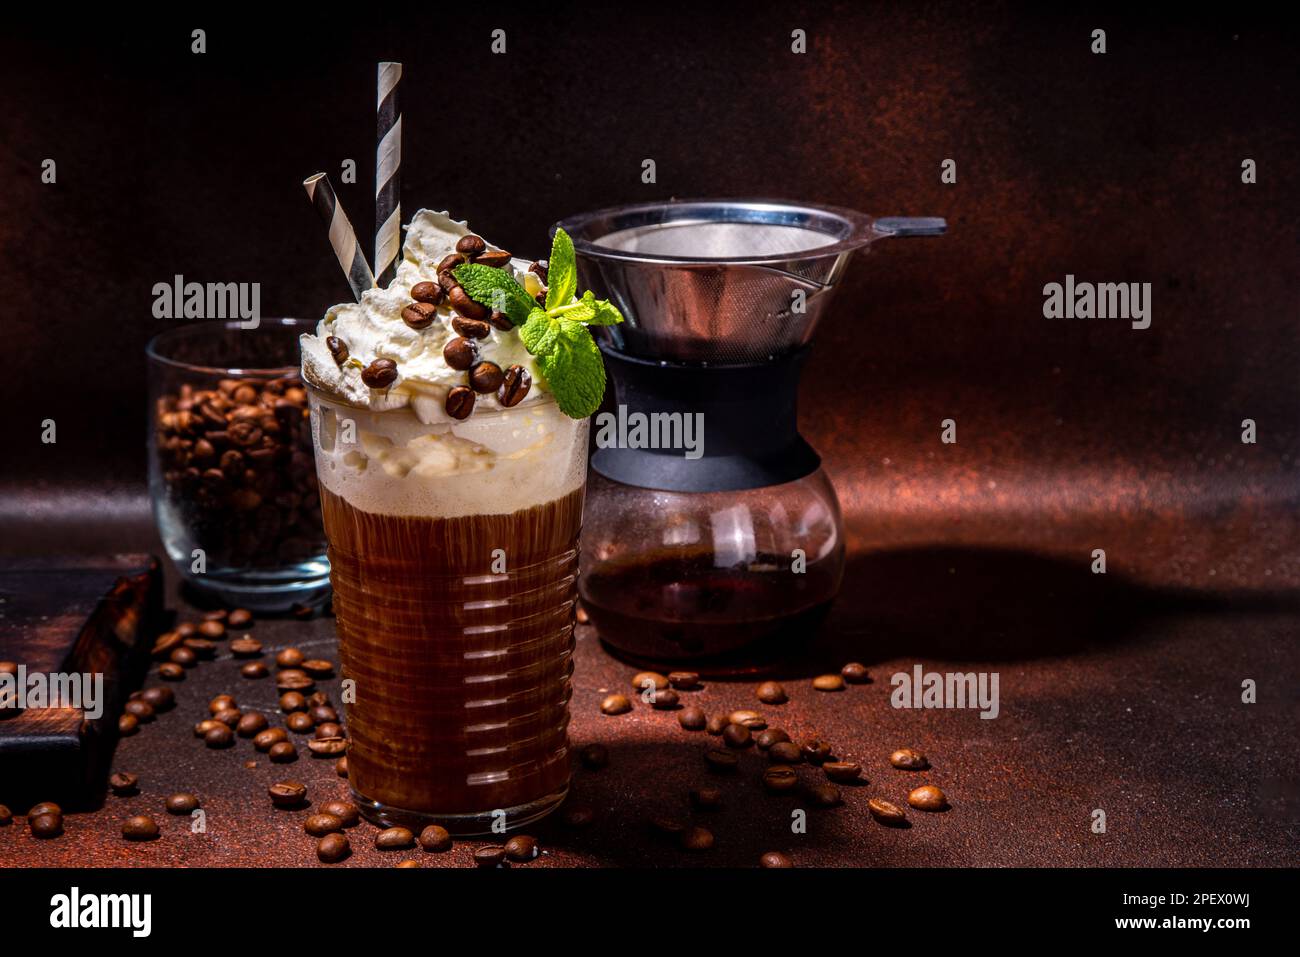 https://c8.alamy.com/comp/2PEX0WJ/iced-coffee-in-tall-glass-one-sweet-cold-latte-with-whipped-cream-with-chemex-coffee-maker-on-dark-brown-background-copy-space-2PEX0WJ.jpg